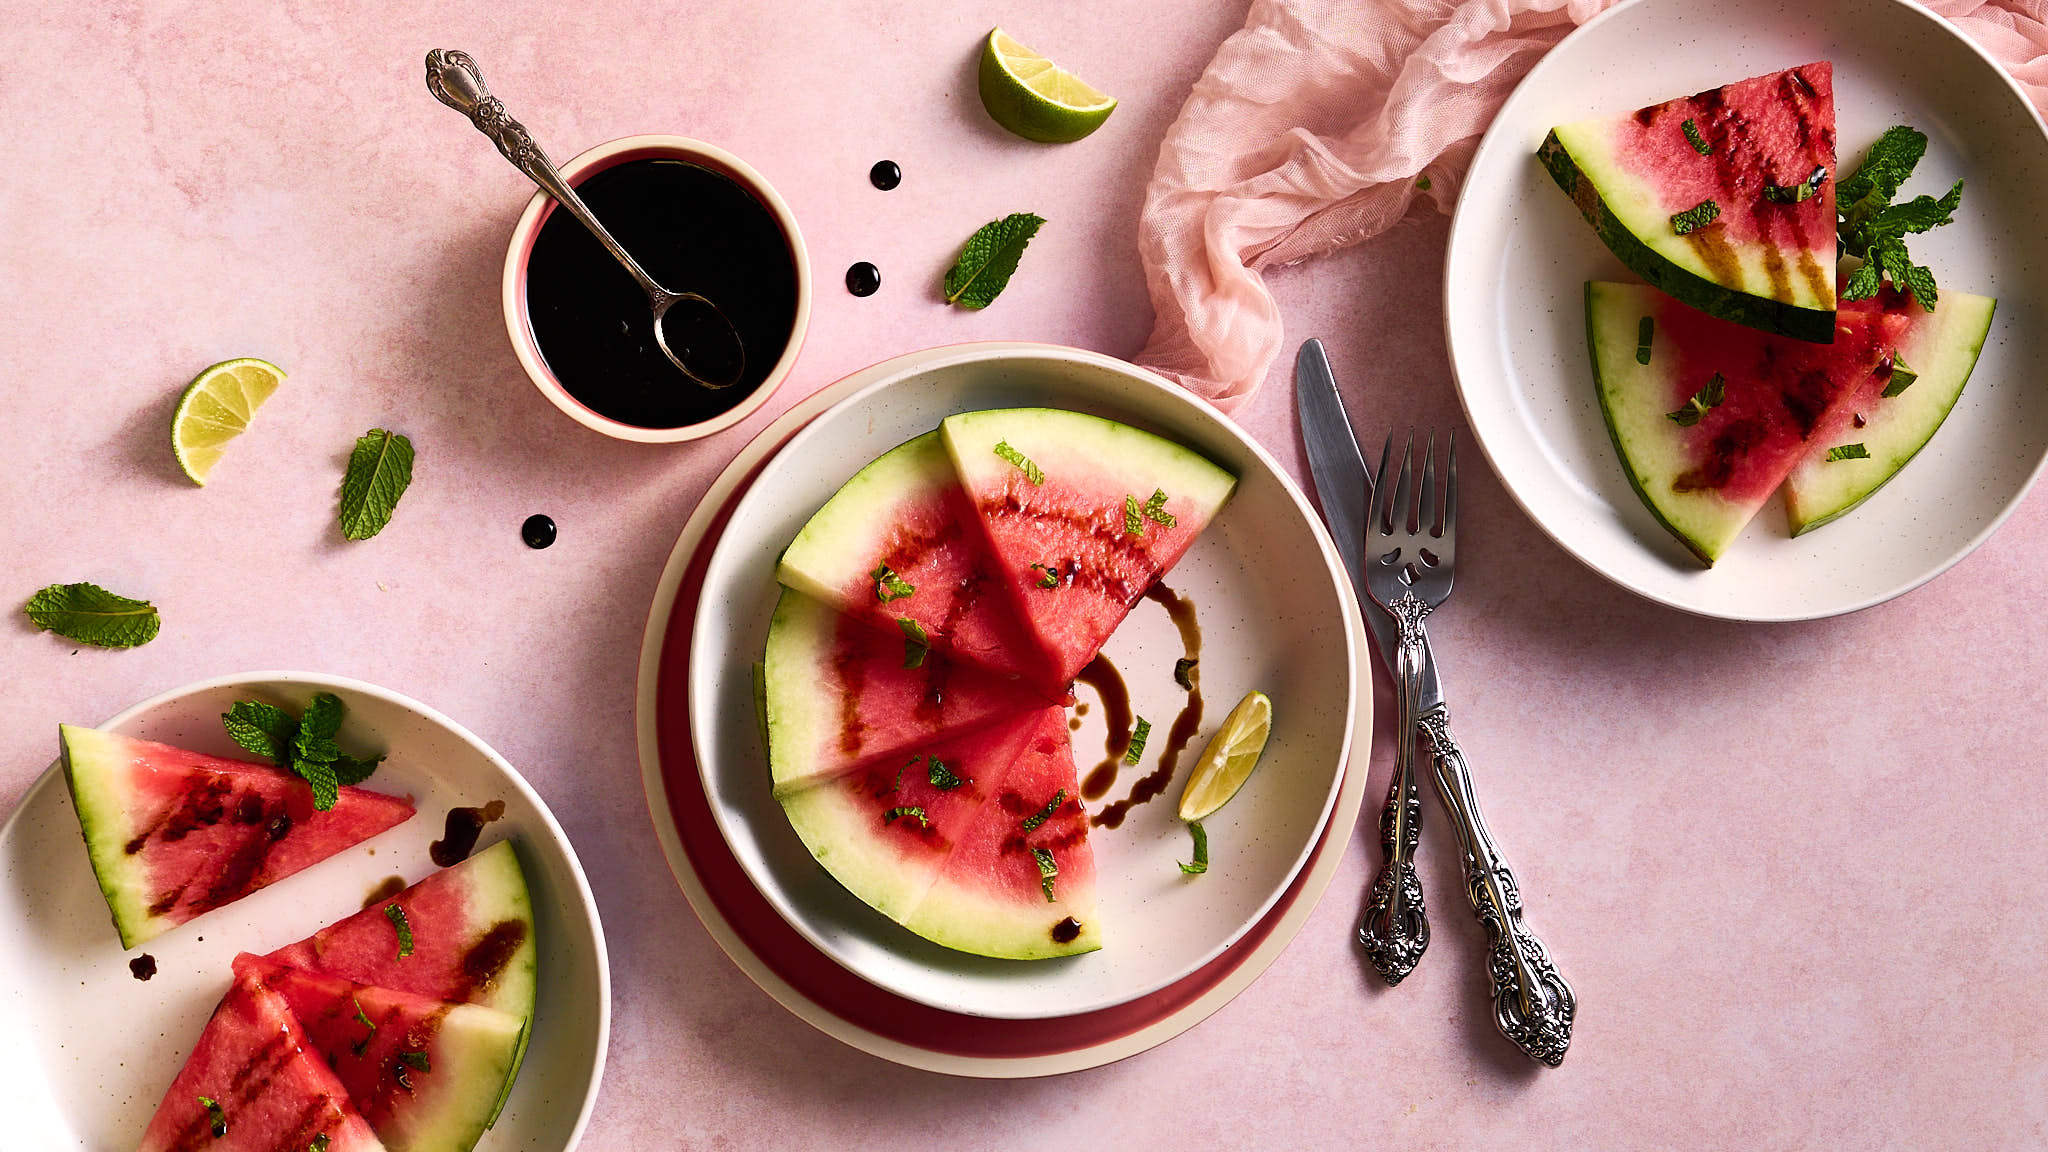 Watermelon-Mint salad with a tamarind, honey, and lime drizzle